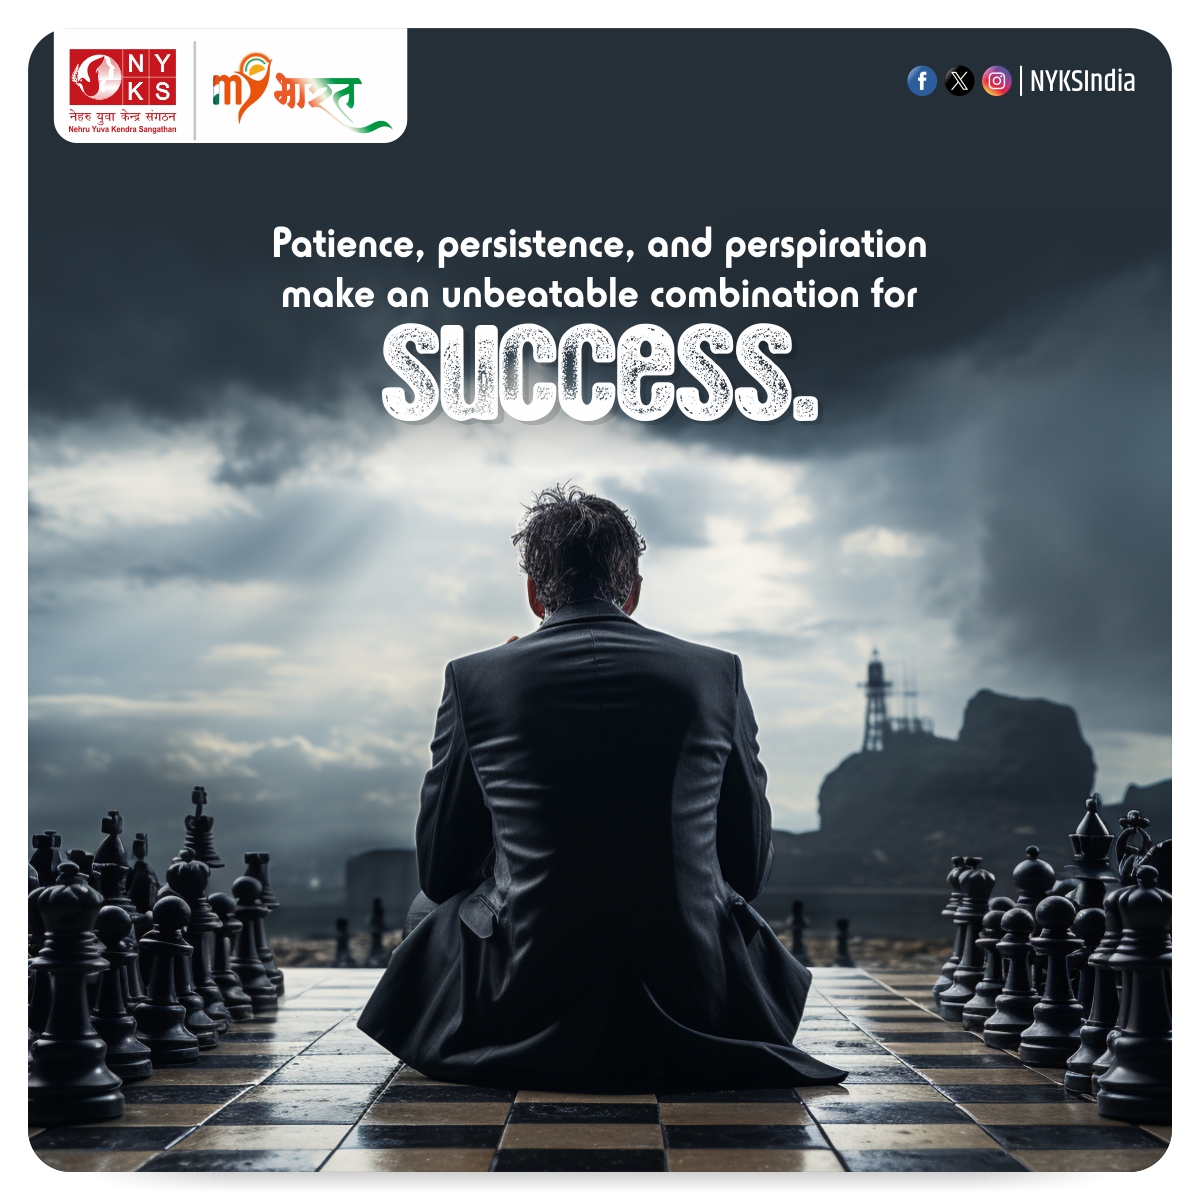 Quote of the Day! Unlock the formula for success: Patience, persistence, and perspiration. Embrace this winning combination and watch your dreams turn into reality. #quoteoftheday #MondayMotivation #thoughtoftheday #SuccessFormula #NeverGiveUp #NYKS